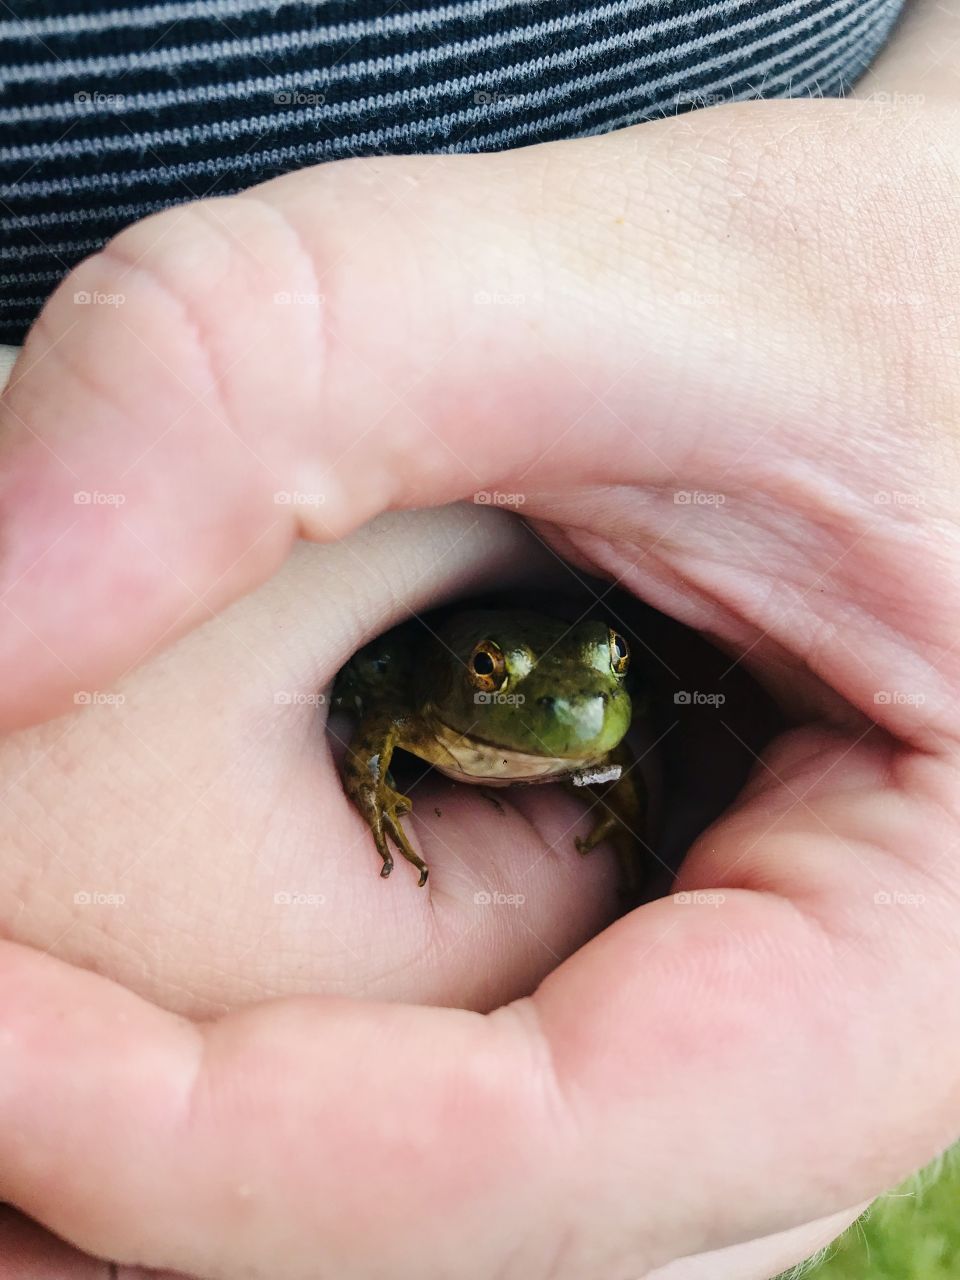 Darling little green slippery frog in young boys hands found while playing outside!!